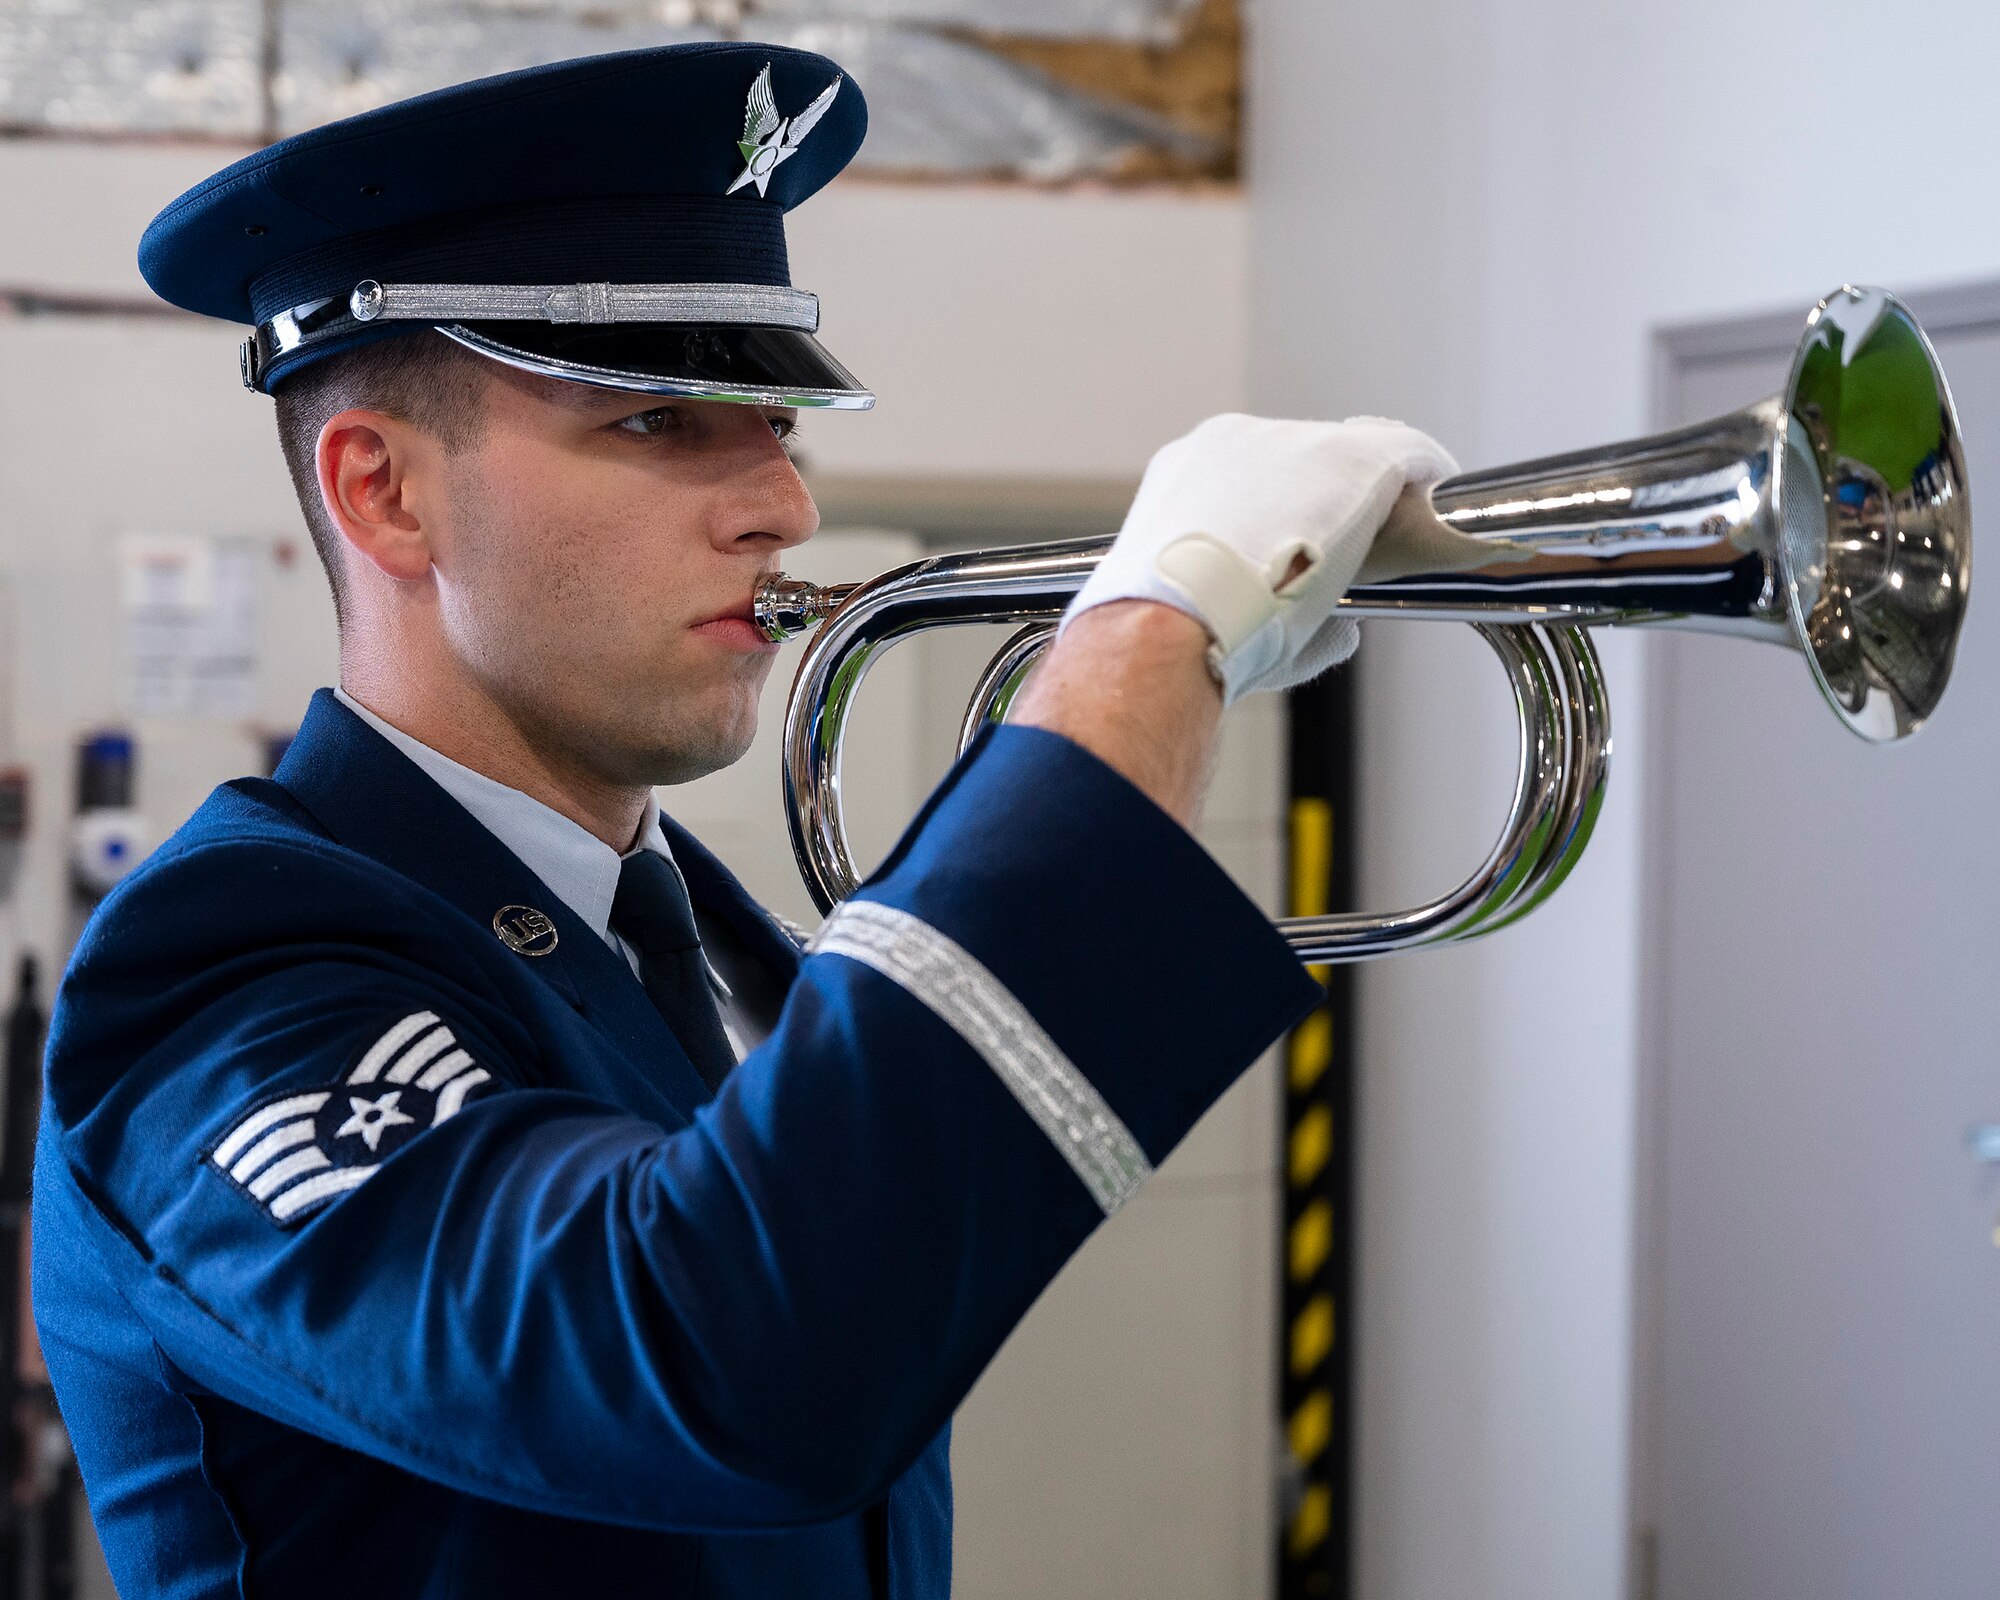 Staff Sgt. George Merusi, a new member of the Wright-Patterson Air Force Base Honor Guard, demonstrates the playing of “Taps” as part of a military funeral during the honor guard’s graduation ceremony, April 25, 2022. The bugle holds a hidden speaker that plays the music so that Airmen on six-month temporary duty do not need to learn how to play a musical instrument. (U.S. Air Force photo by R.J. Oriez)